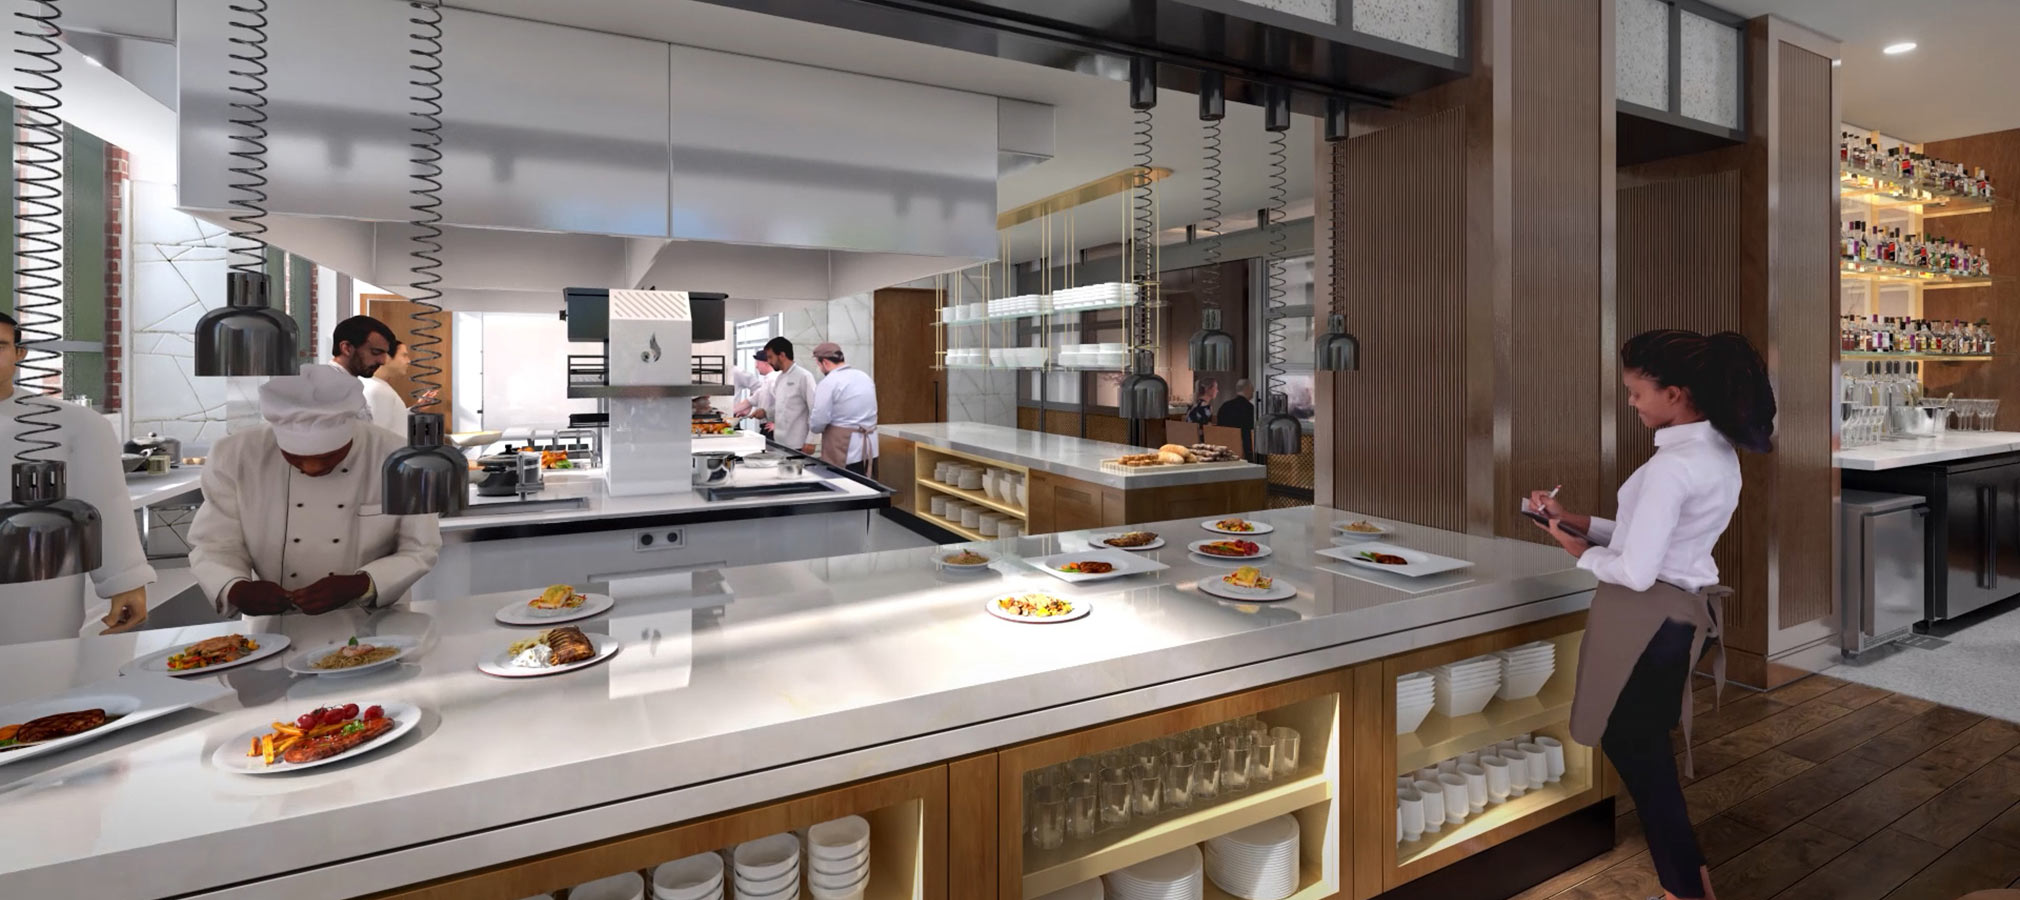 Rendering of the open concept kitchen in the new Rane Culinary Science Center.